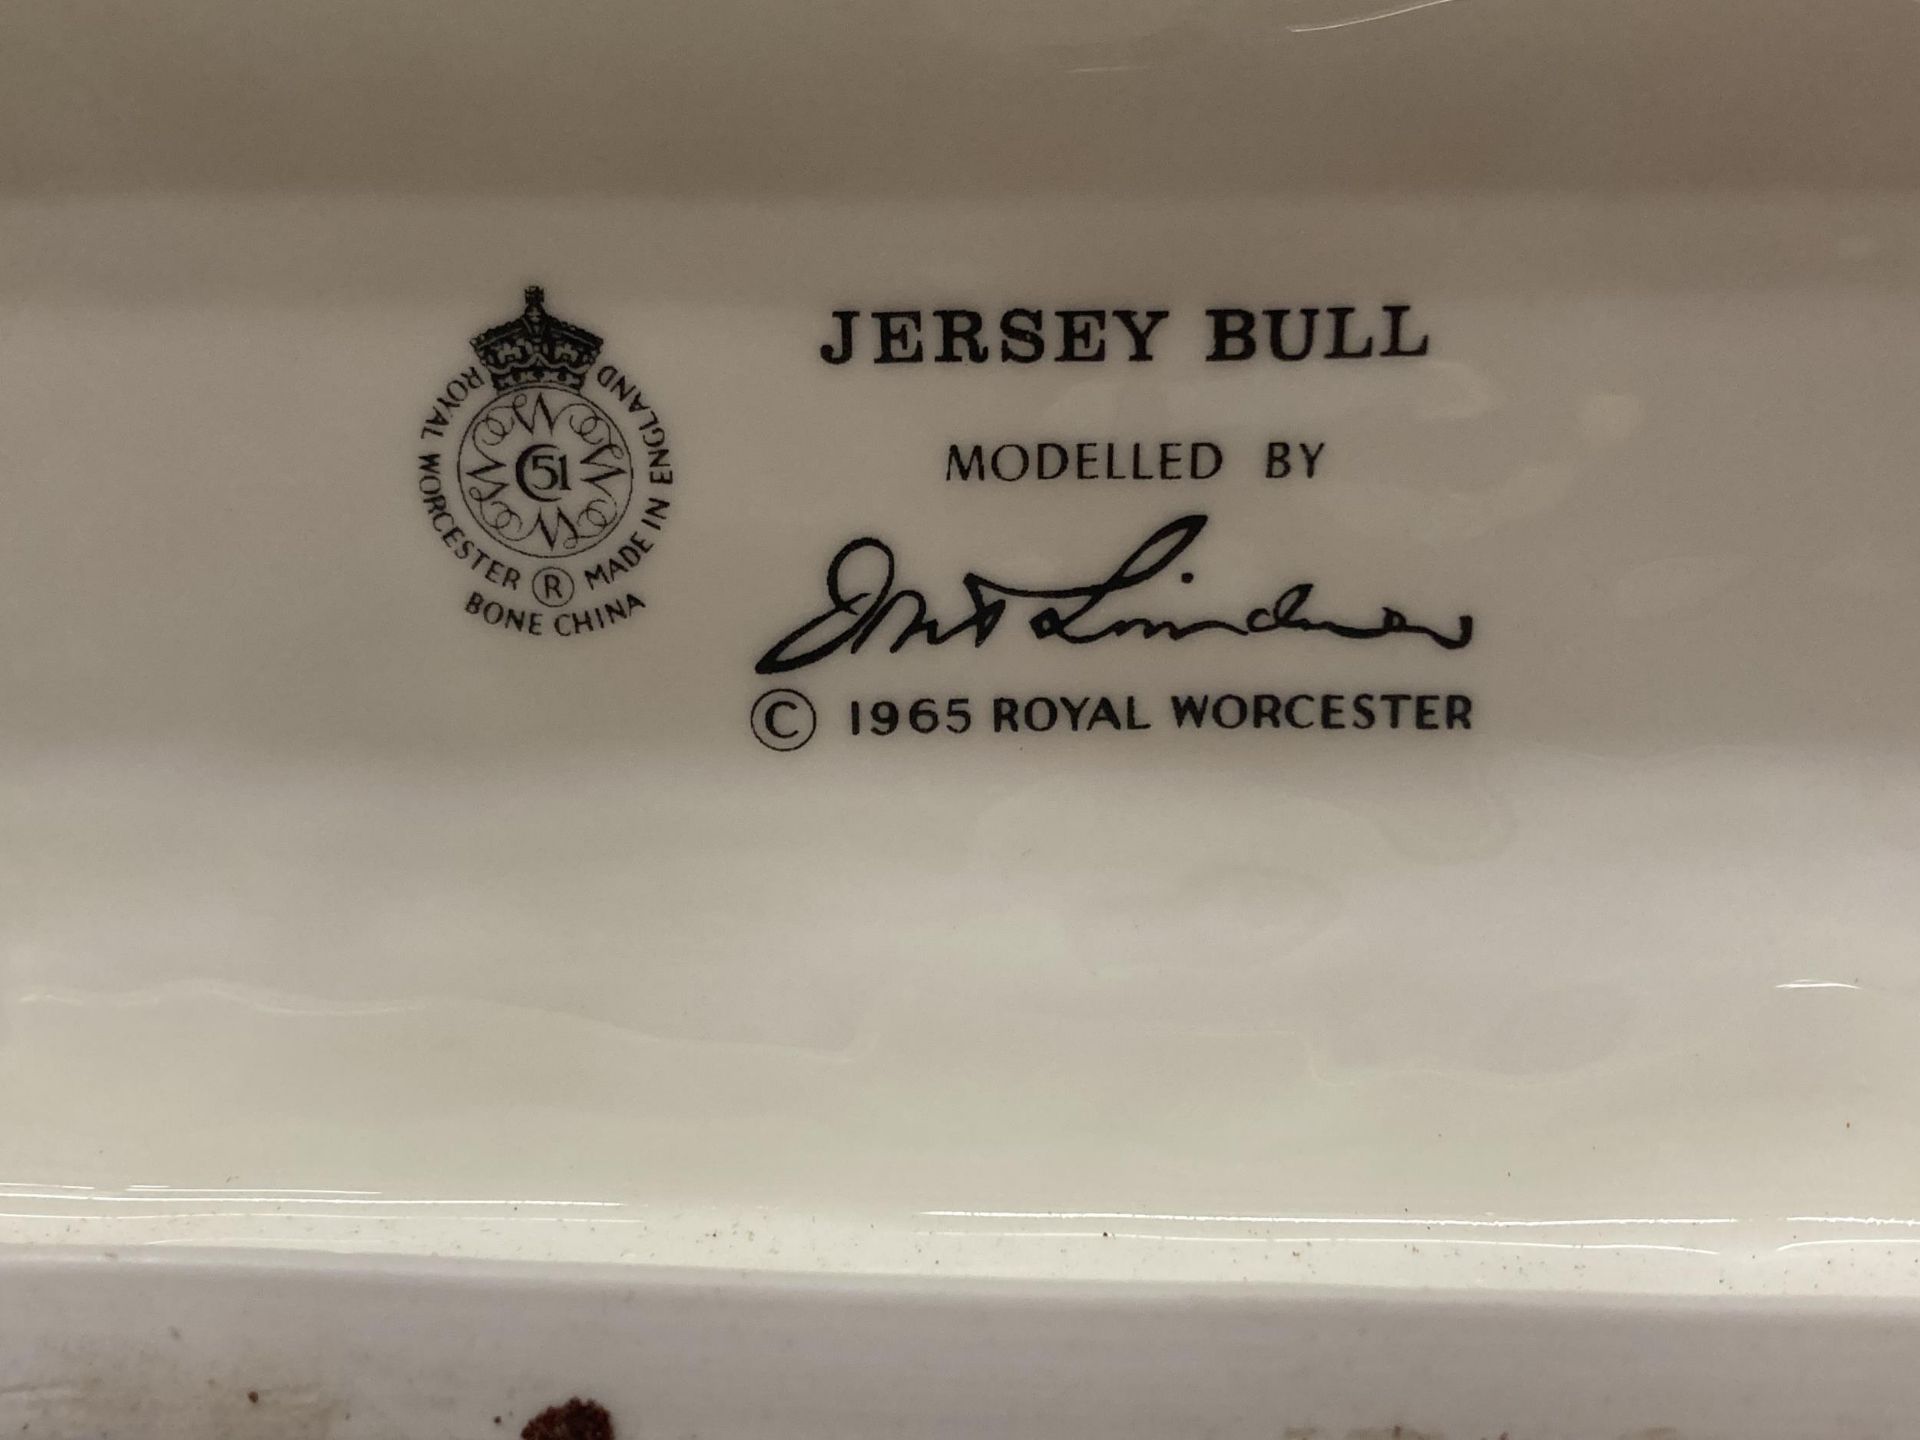 A ROYAL WORCESTER MODEL OF A JERSEY BULL MODELLED BY DORIS LINDNER PRODUCED IN A LIMITED EDITION - Image 5 of 5